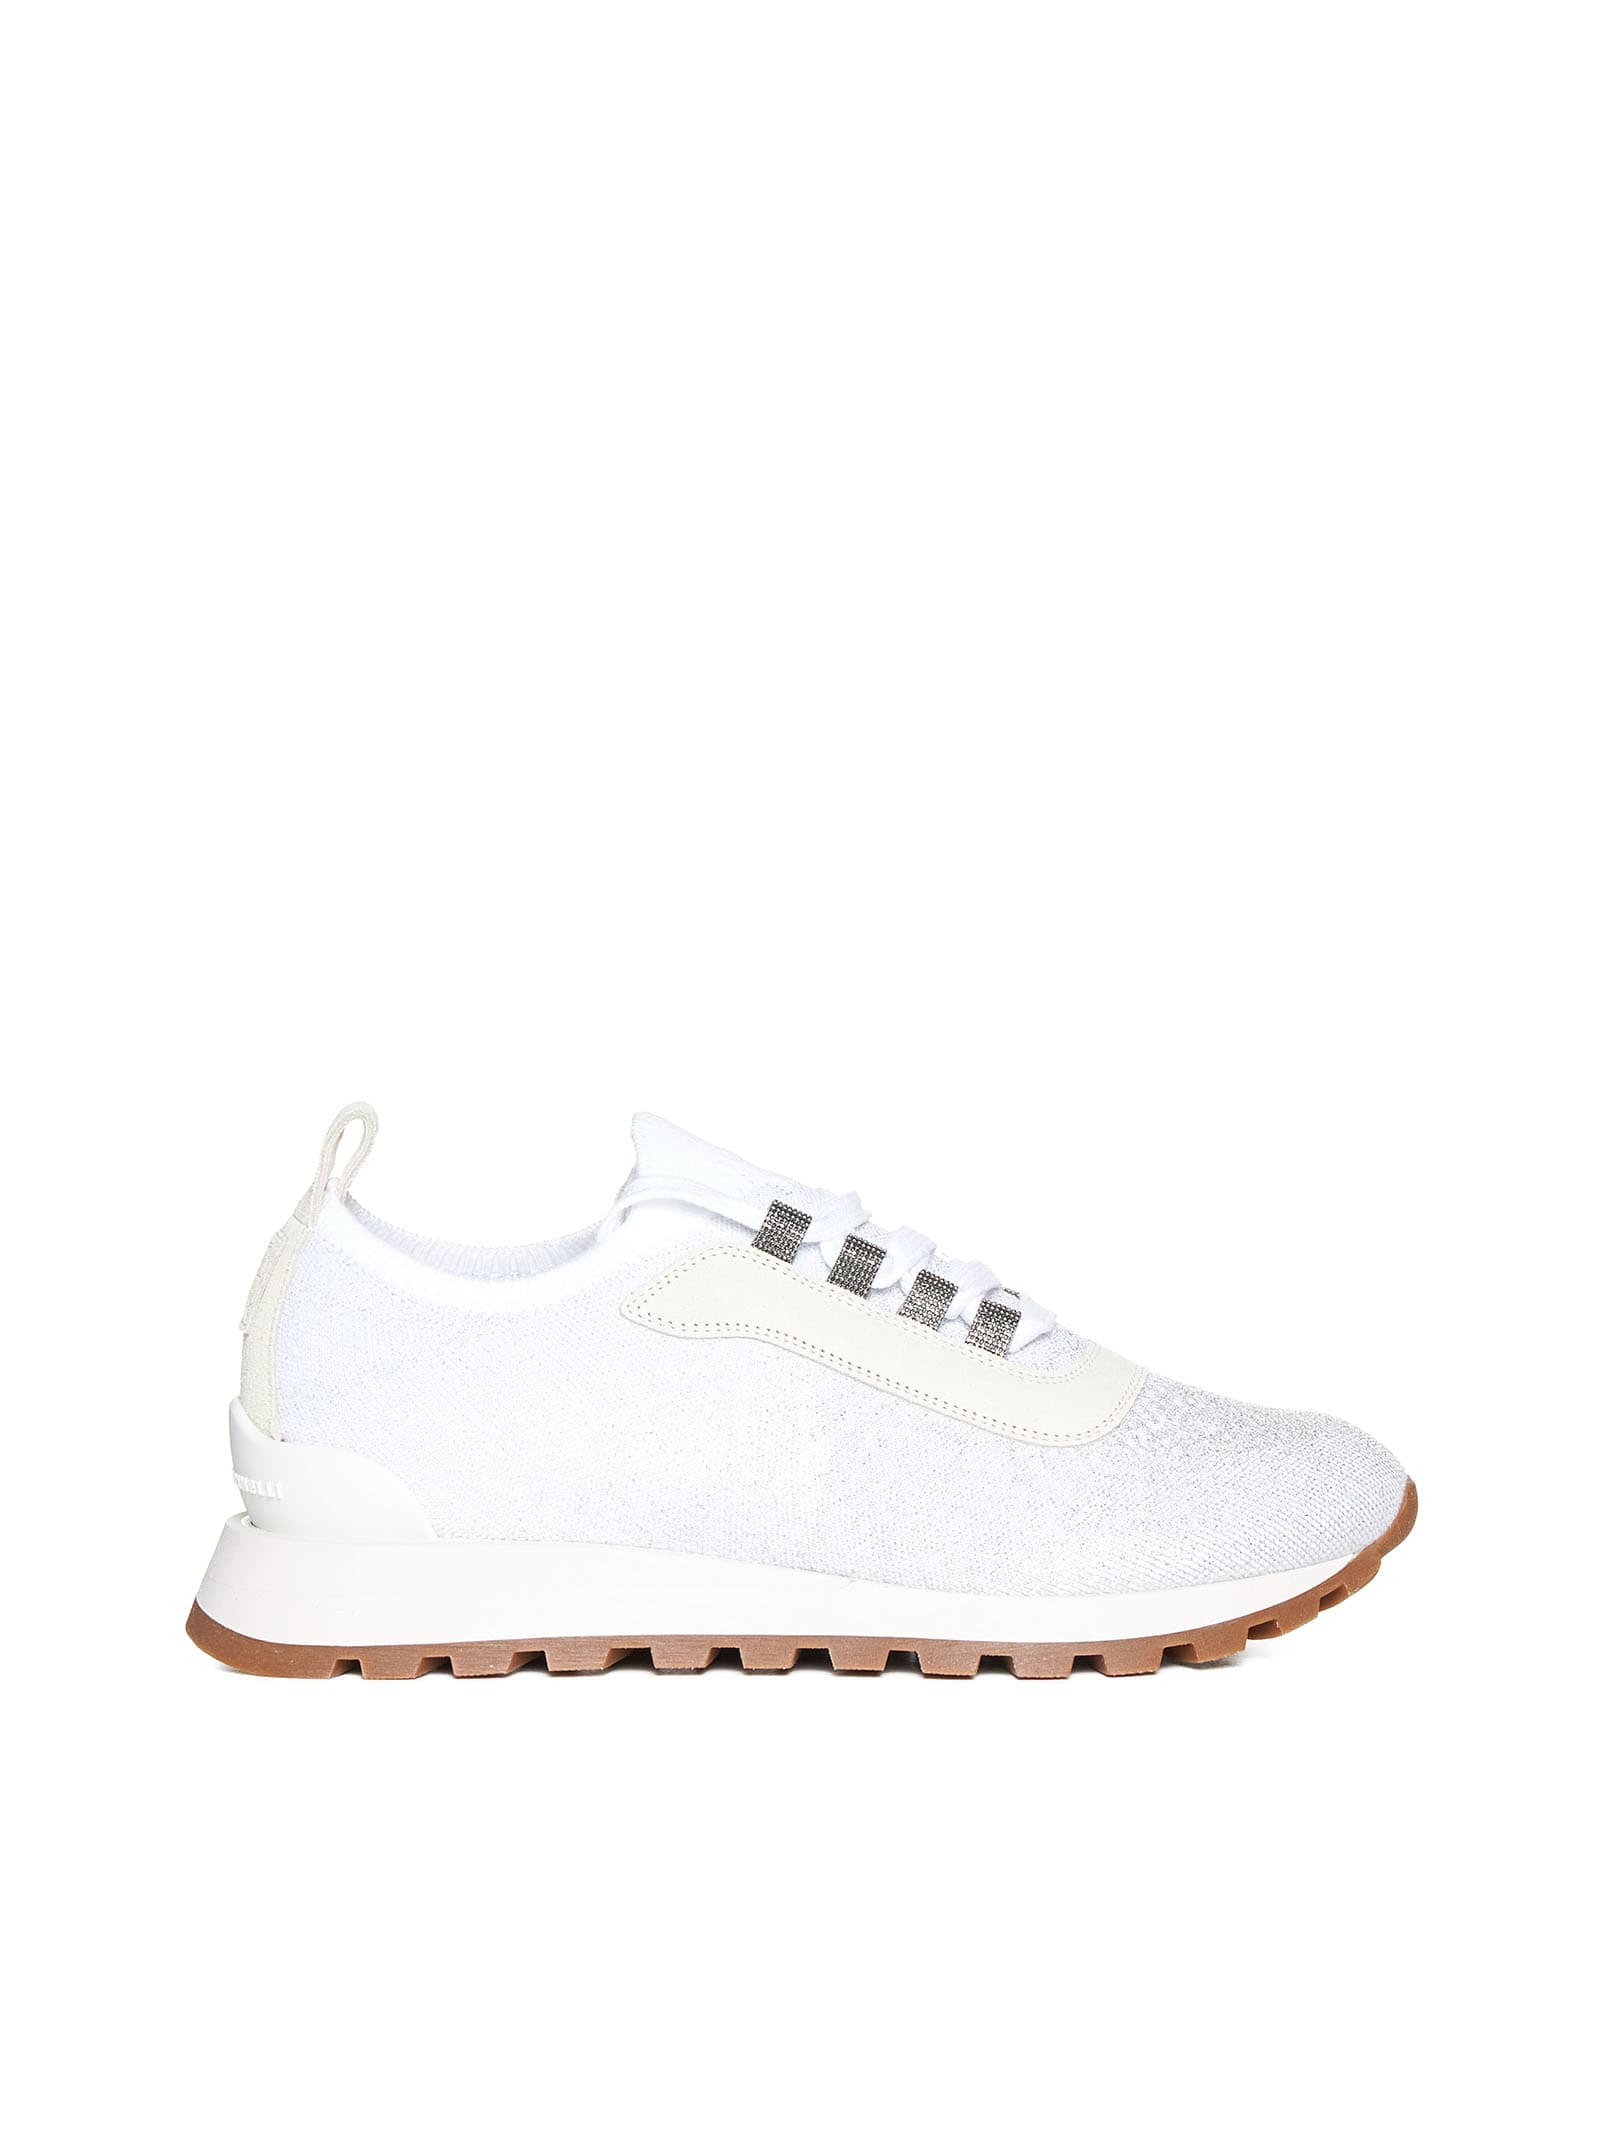 Brunello Cucinelli Knitted Lace-up Sneakers